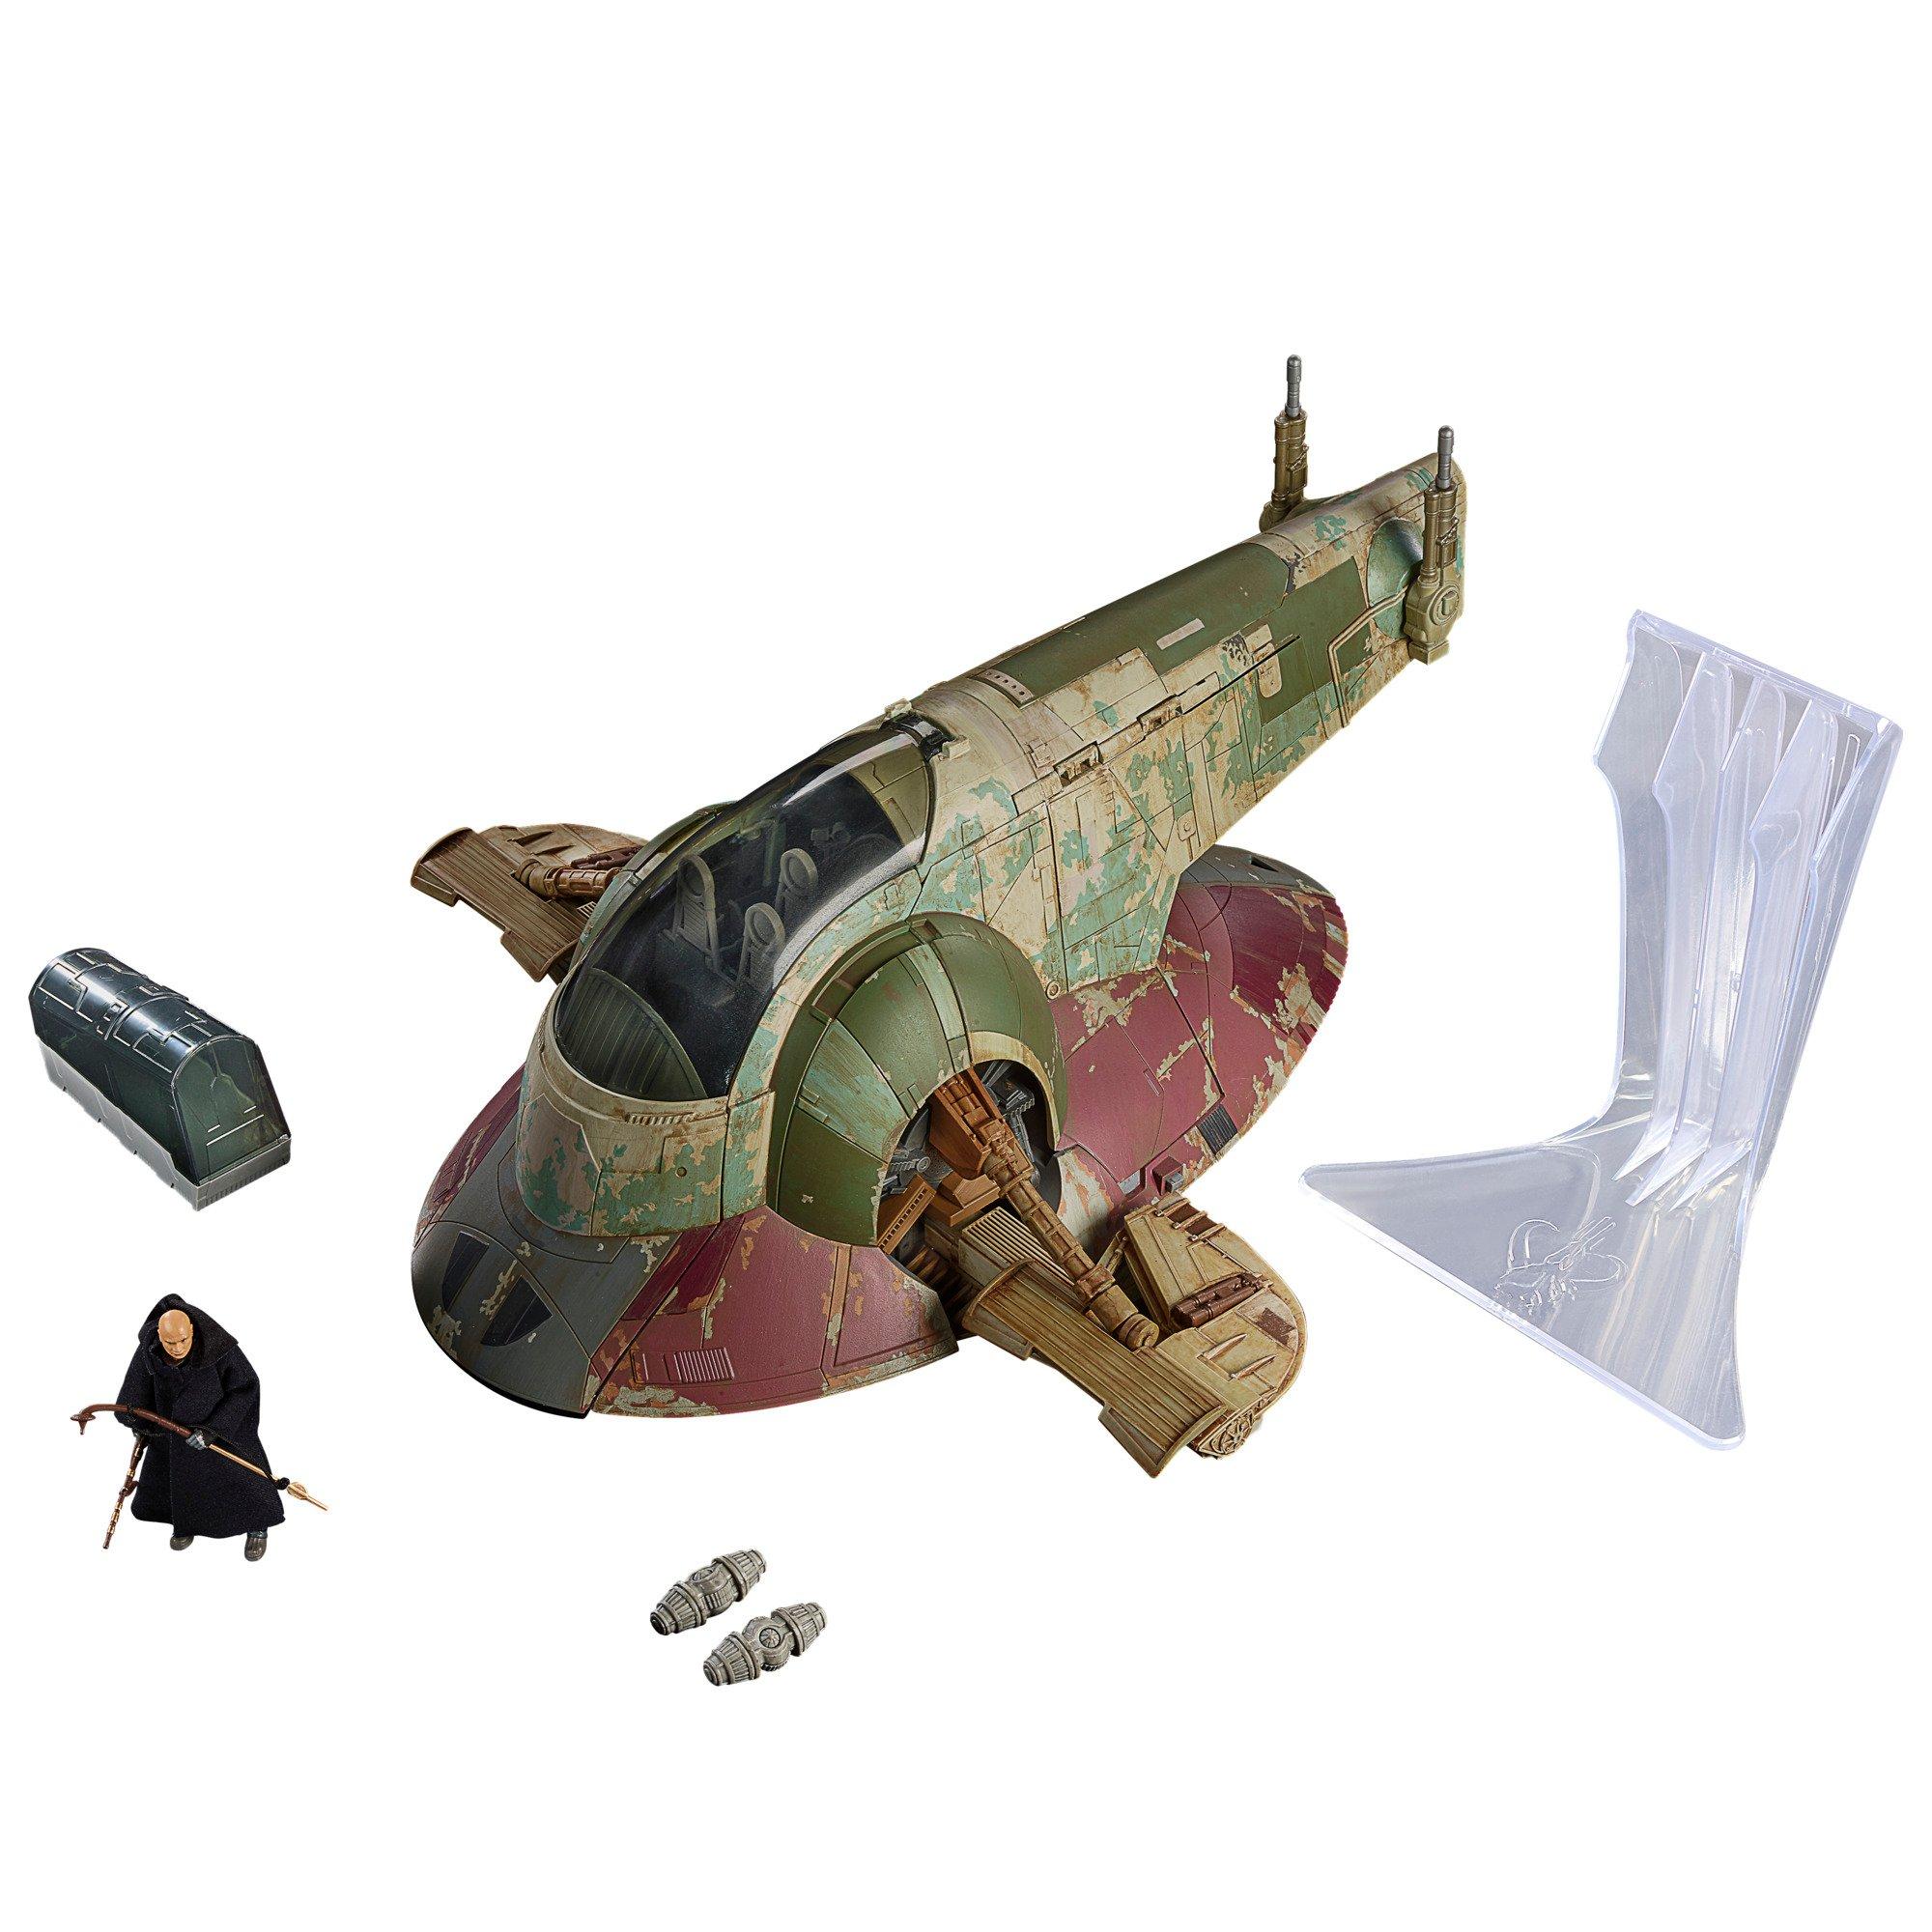 list item 2 of 16 Hasbro Star Wars The Vintage Collection The Book of Boba Fett - Boba Fett Figure and Starship Replica